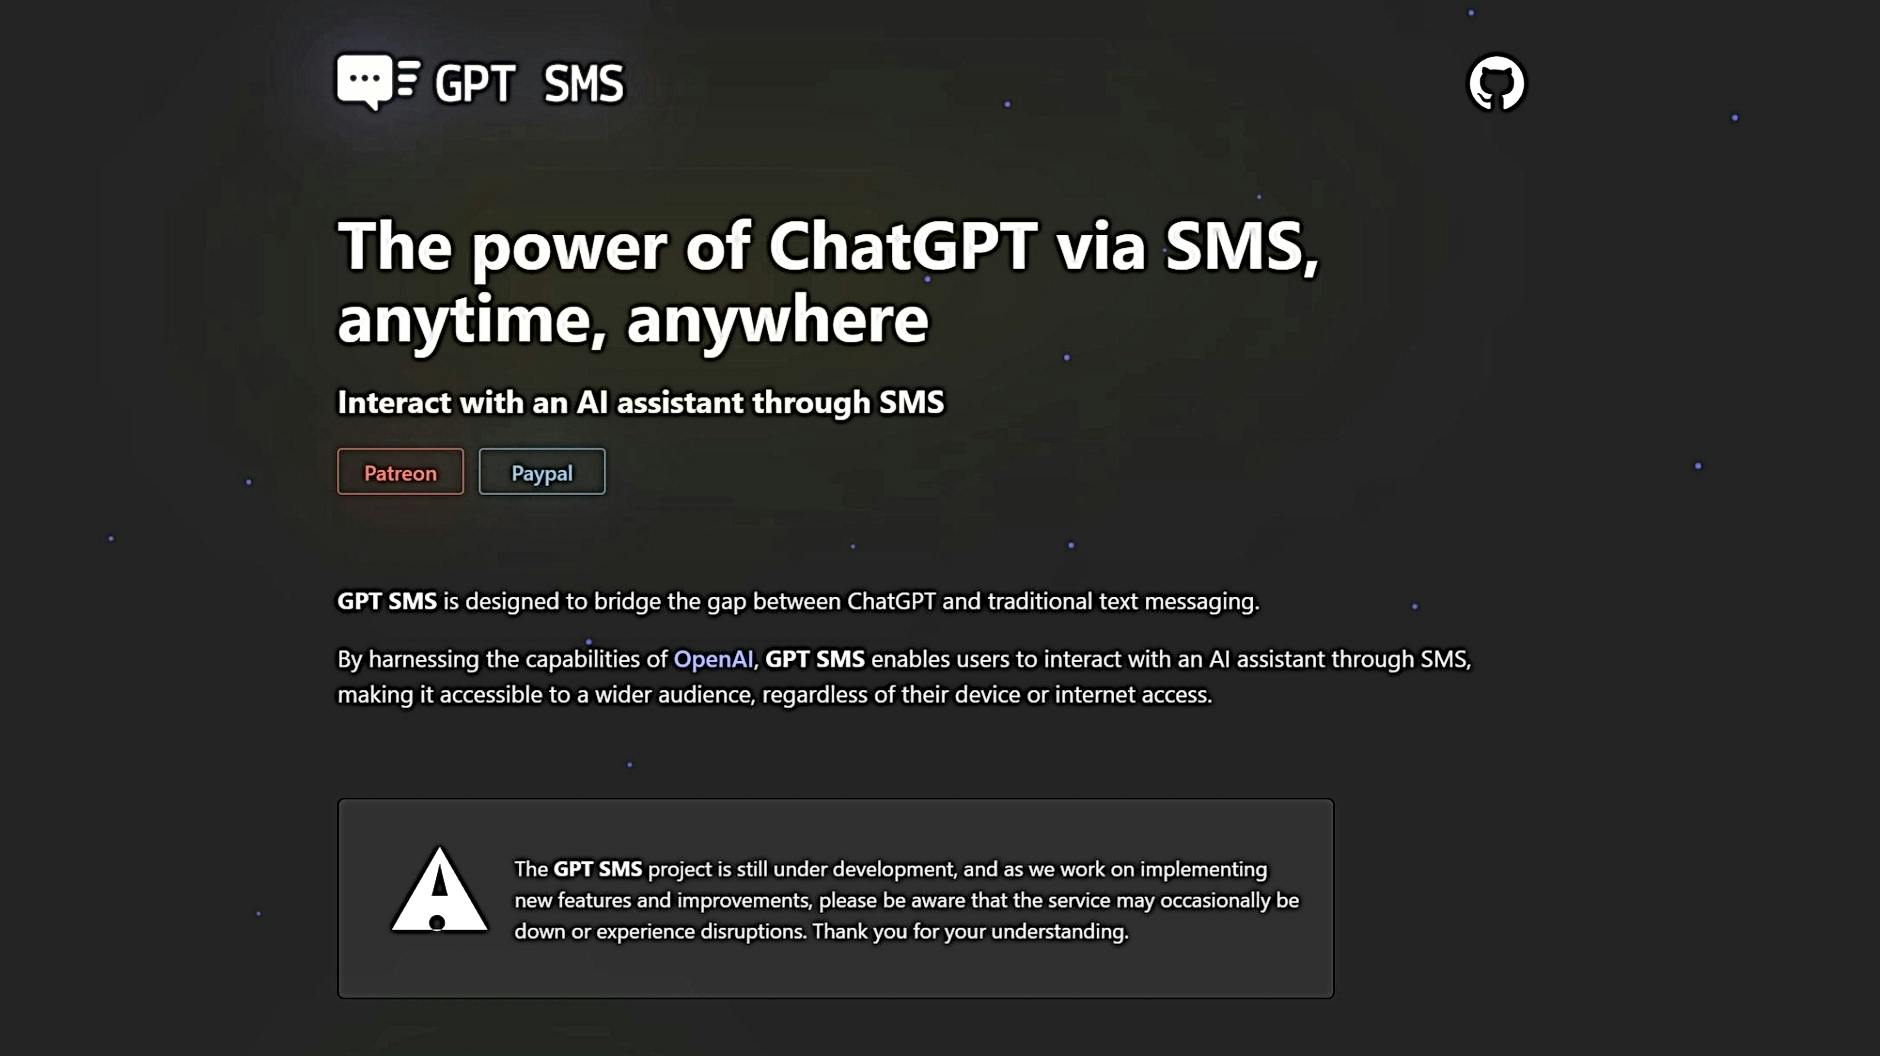 GPT SMS featured